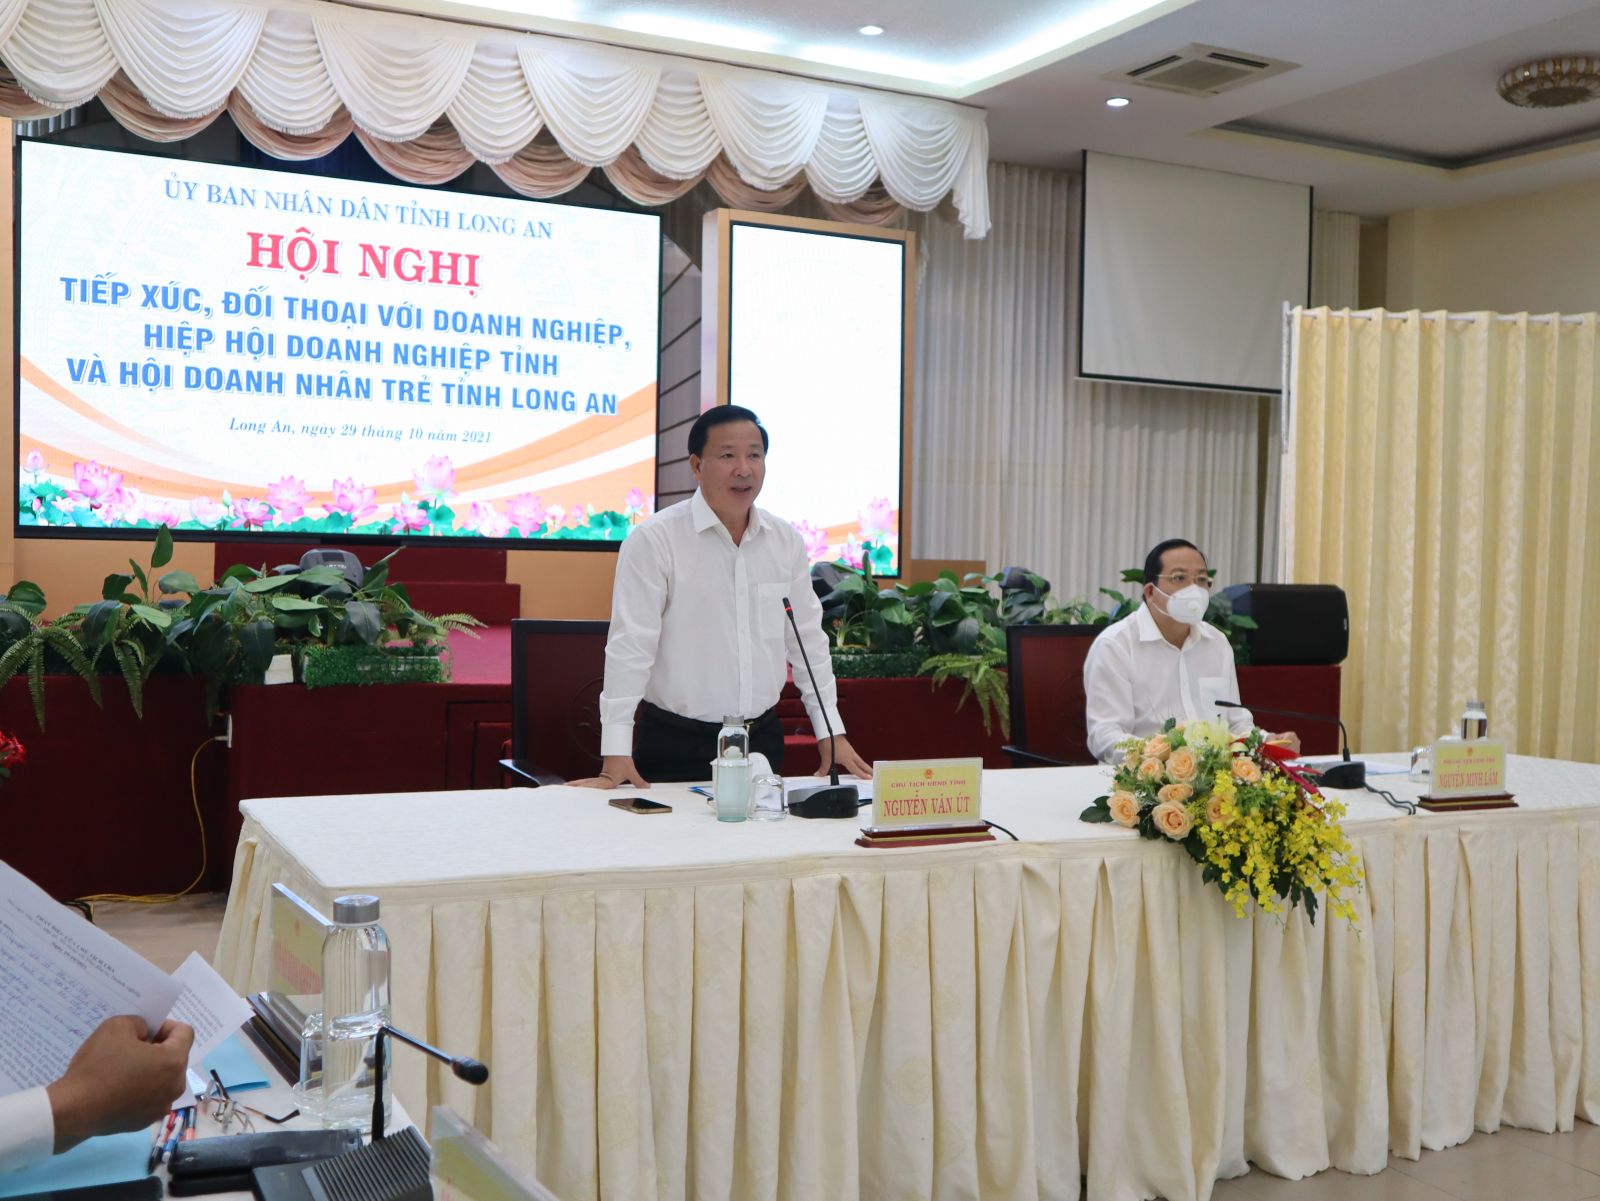 Chairman of the Provincial People's Committee - Nguyen Van Ut suggested that the State Bank of Long An branch should proactively direct commercial banks to 